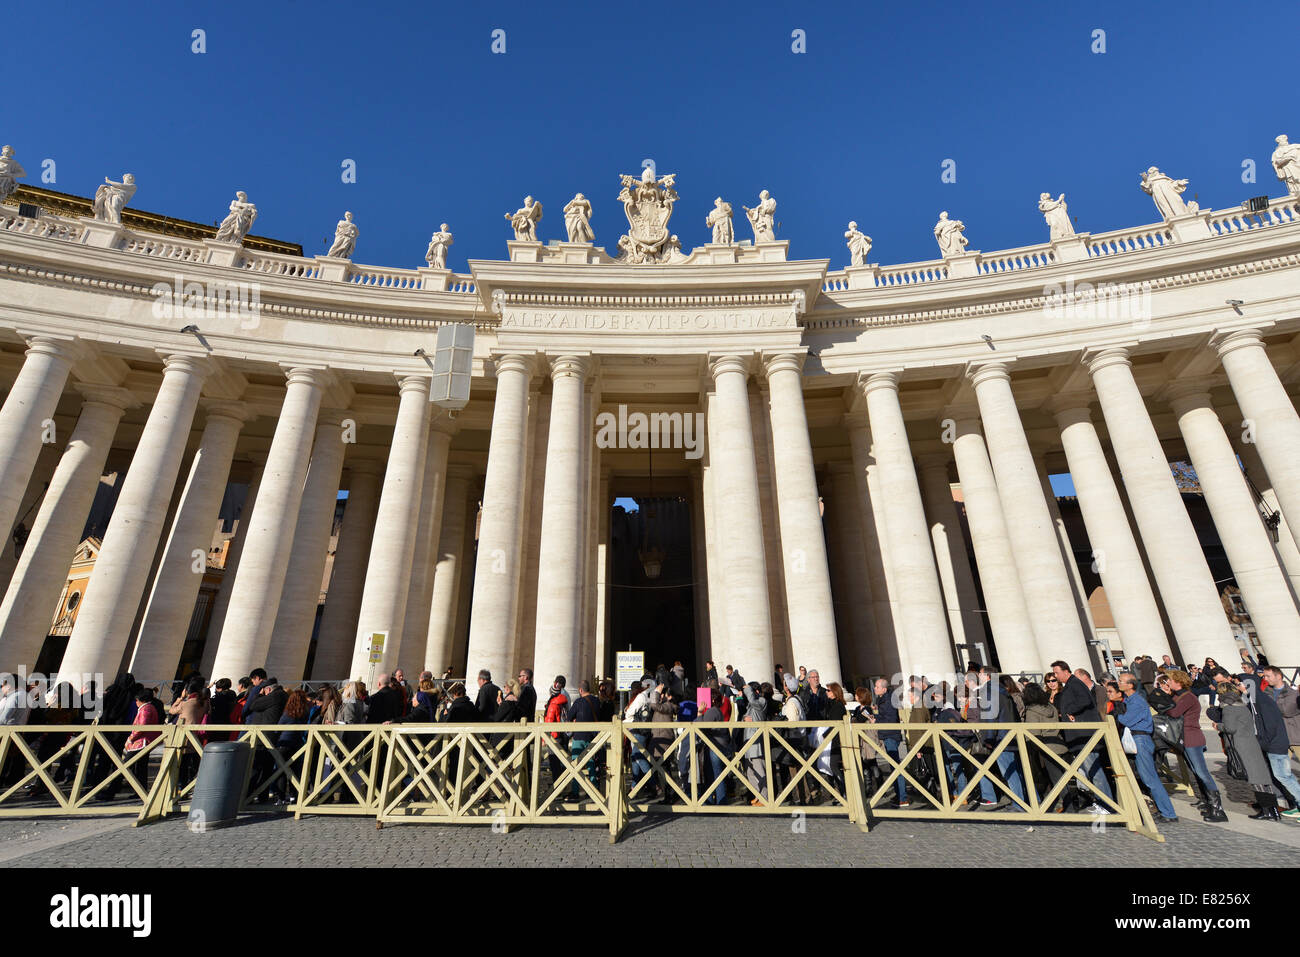 Long queue of people waiting to get into St Peter's Basilica Piazza San Pietro and Bernini's colonnade Stock Photo